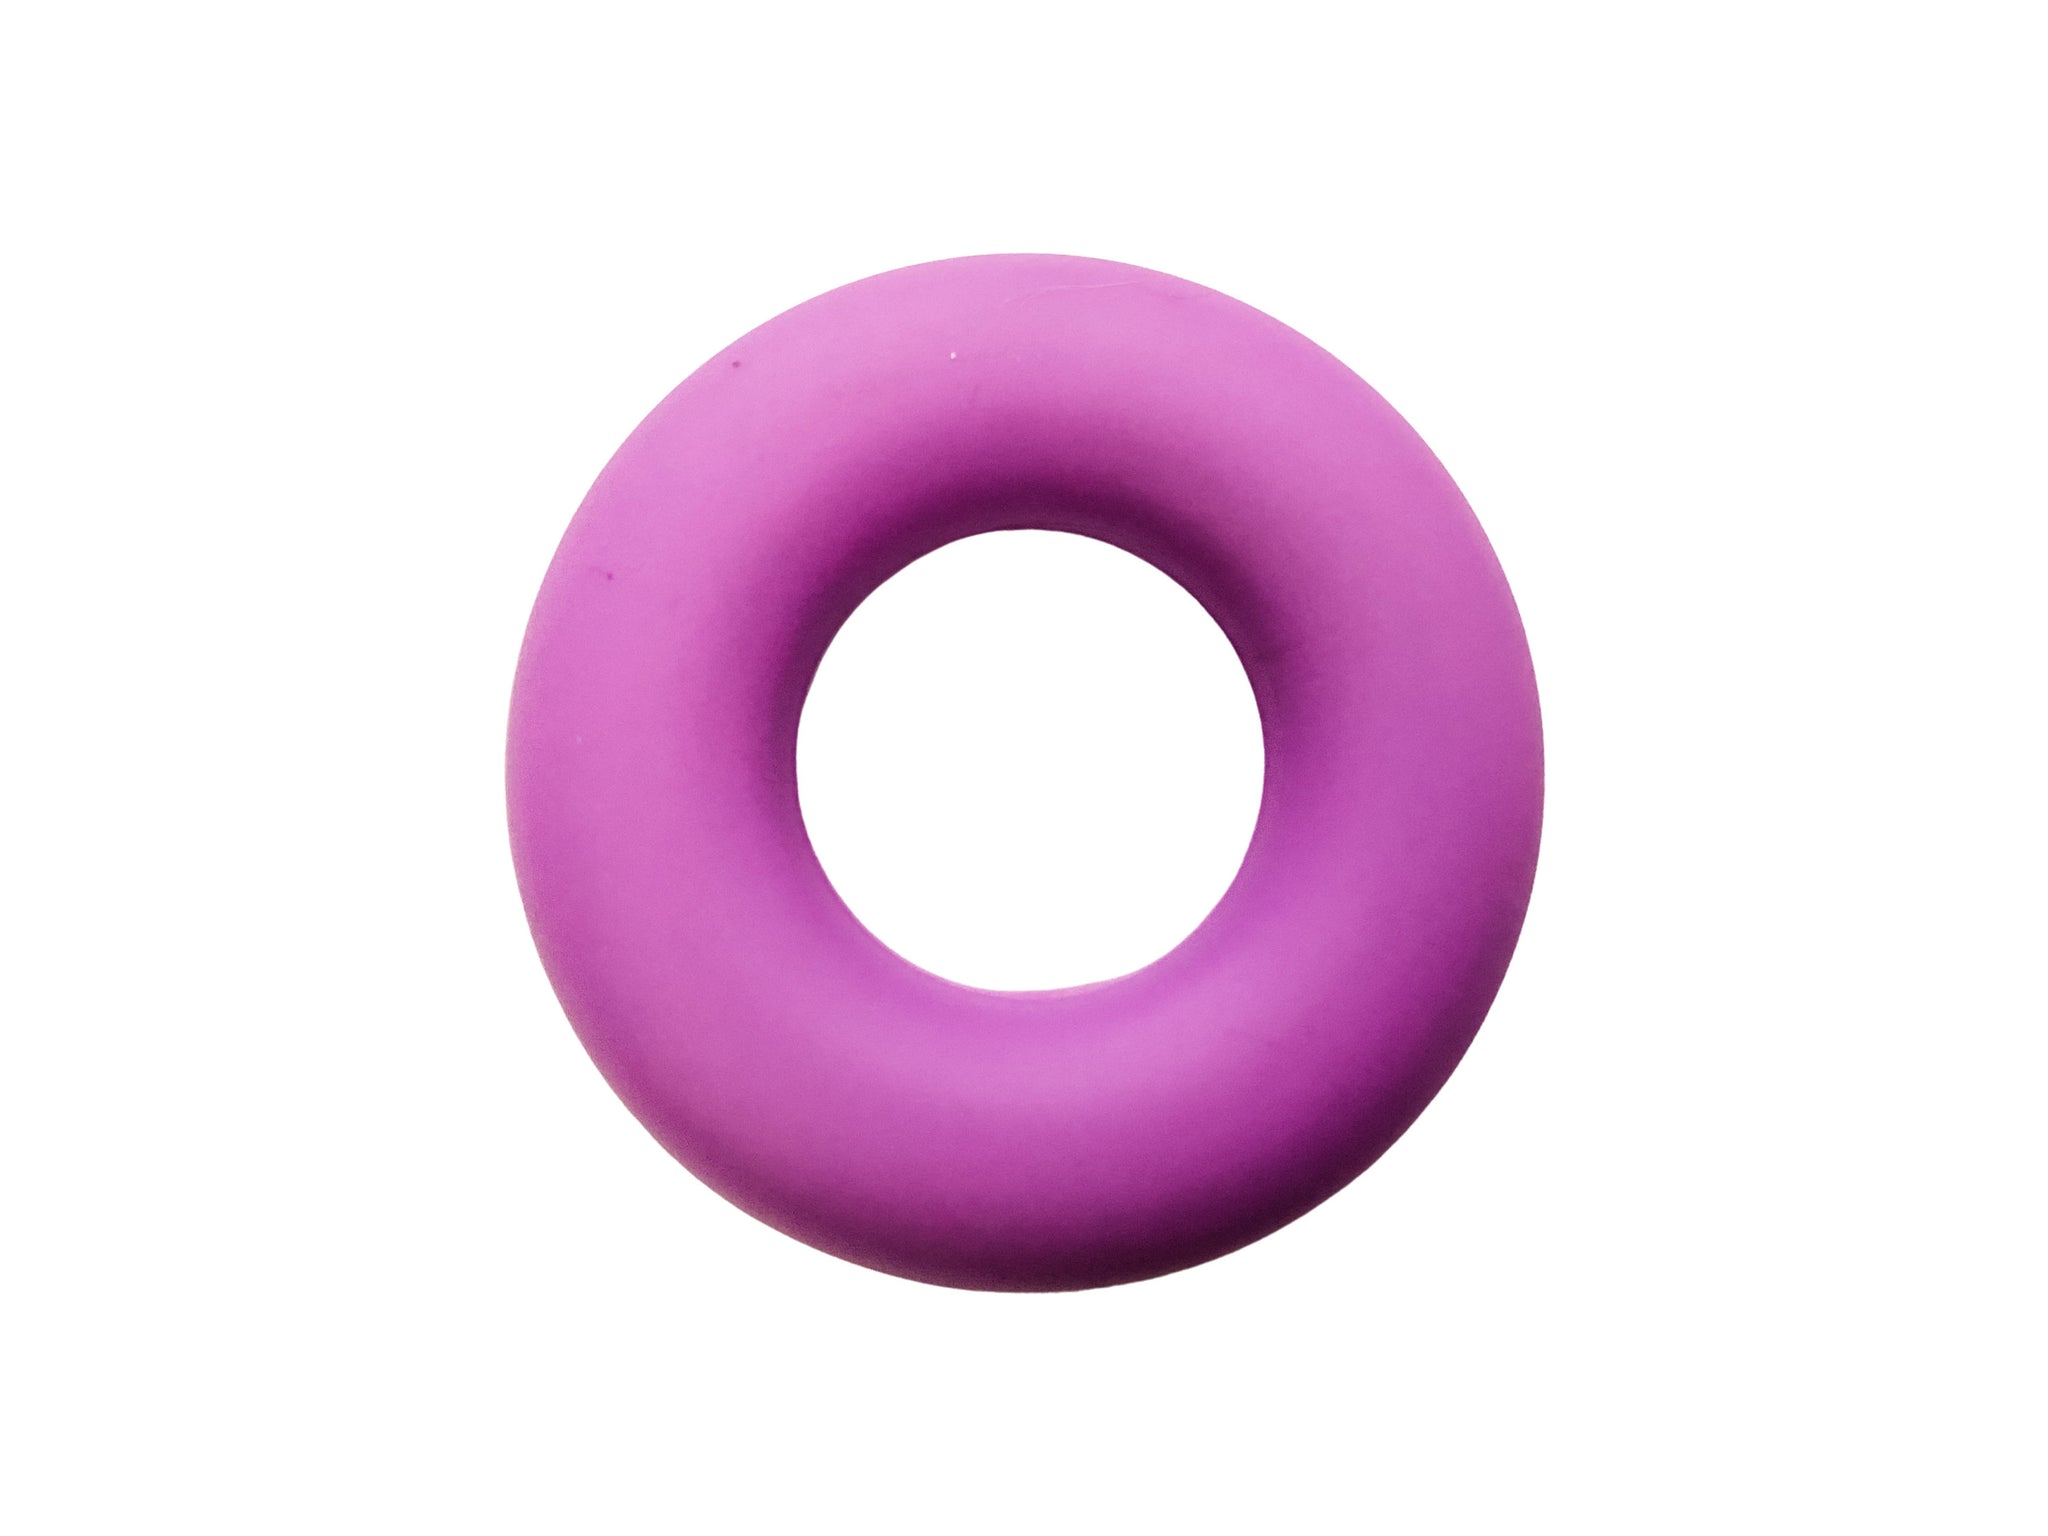 Lavender Silicone Ring Beads Pendant - Purple - Seamless Silicone Donut Beads